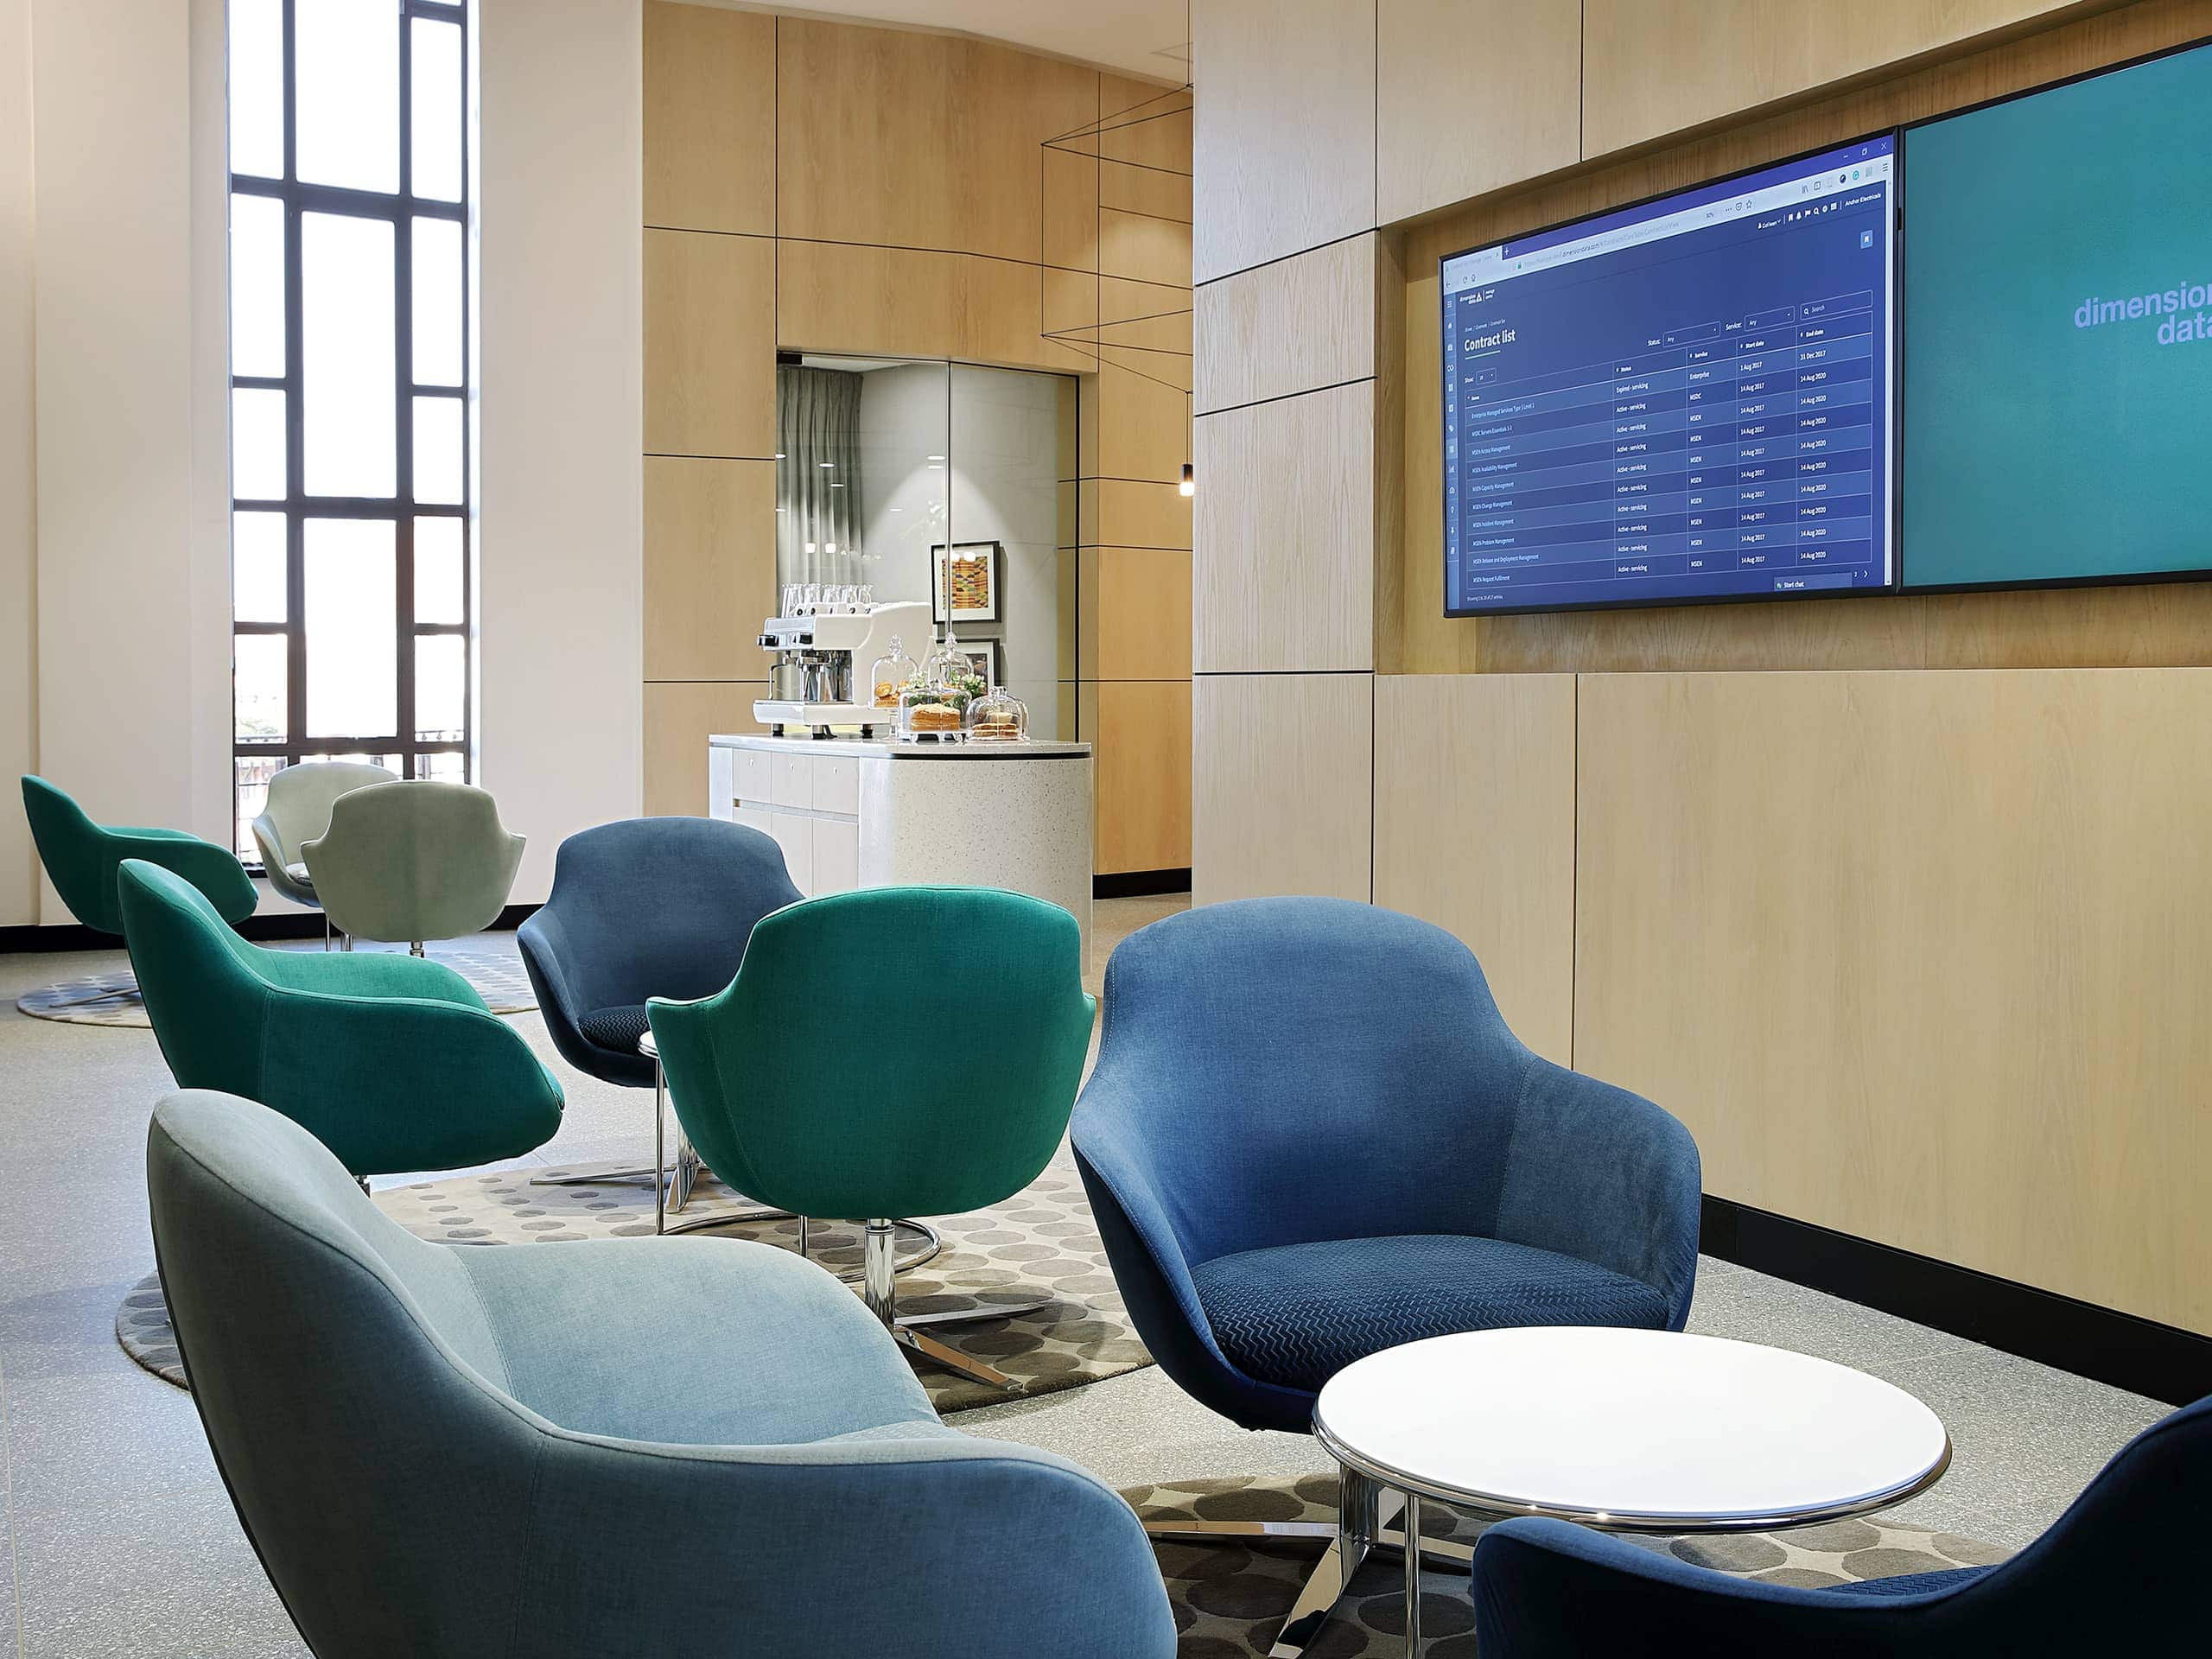 Modern airport members' lounge with comfortable armchairs and food station. Elsa Young Photography.